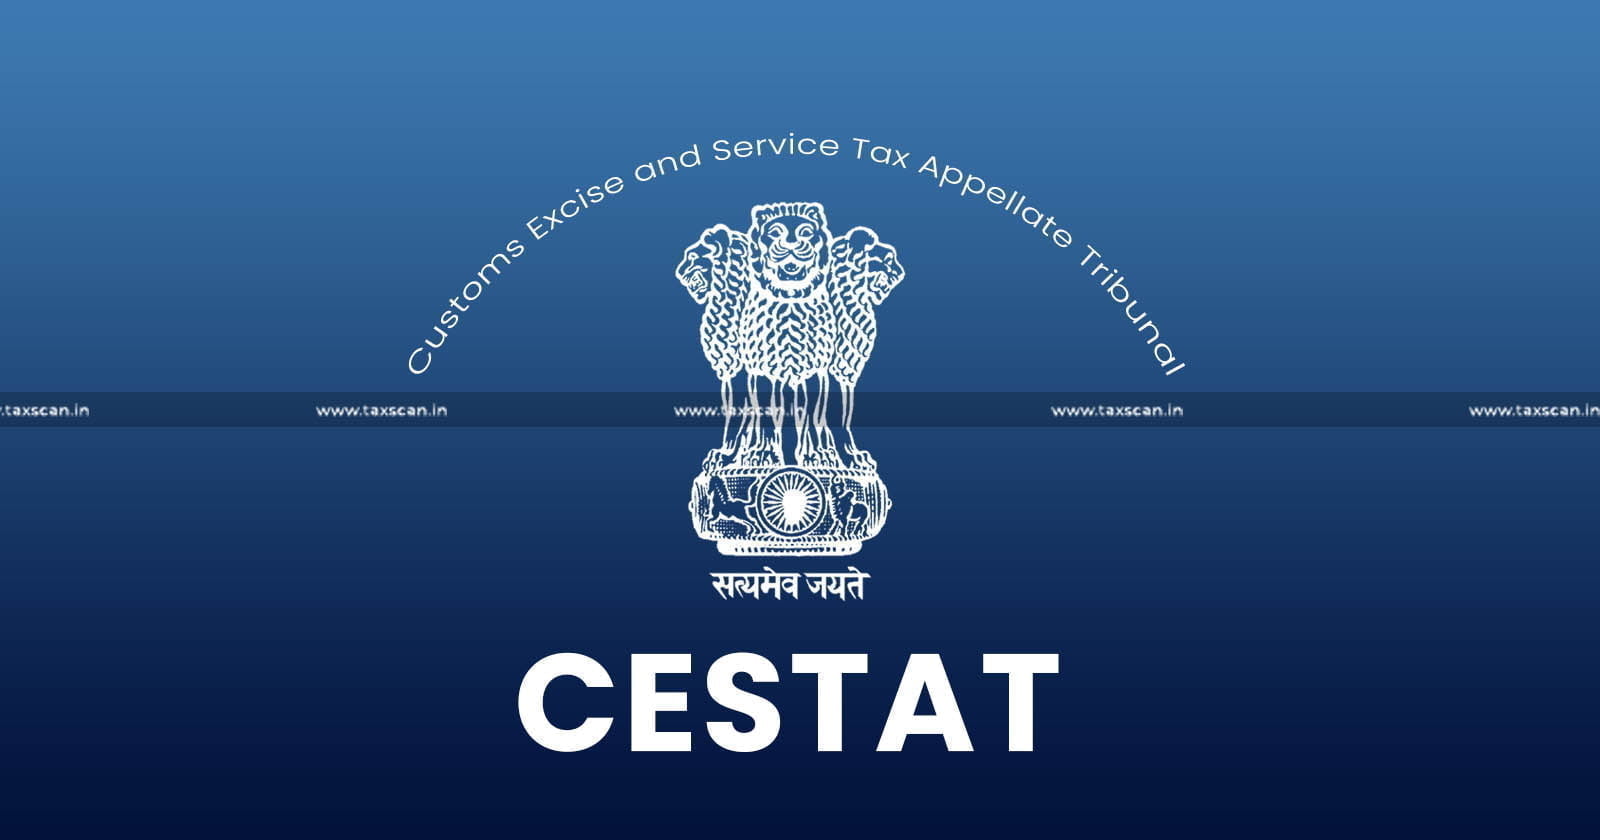 Cestat - Weekly Round UP - Service Tax - Customs - Excise - taxscan